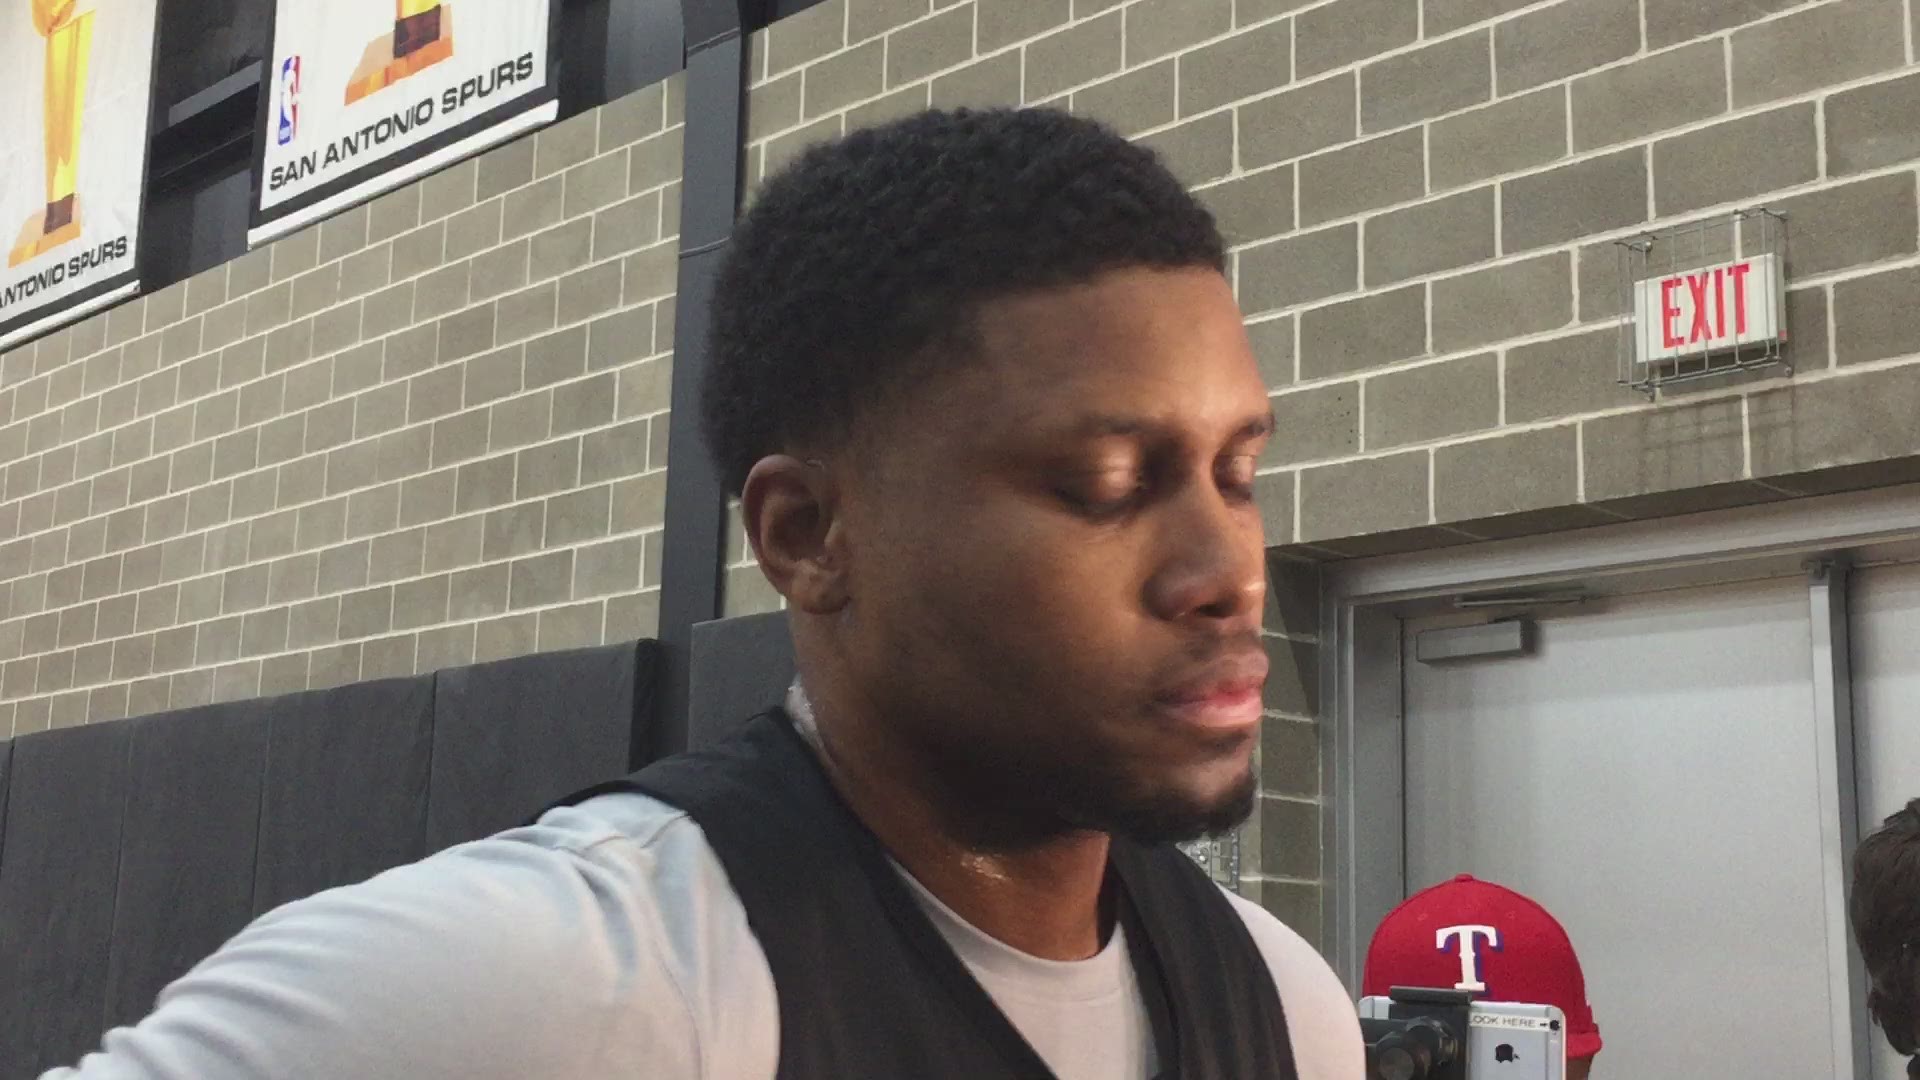 Spurs forward Rudy Gay on his status for Wednesday's season opener